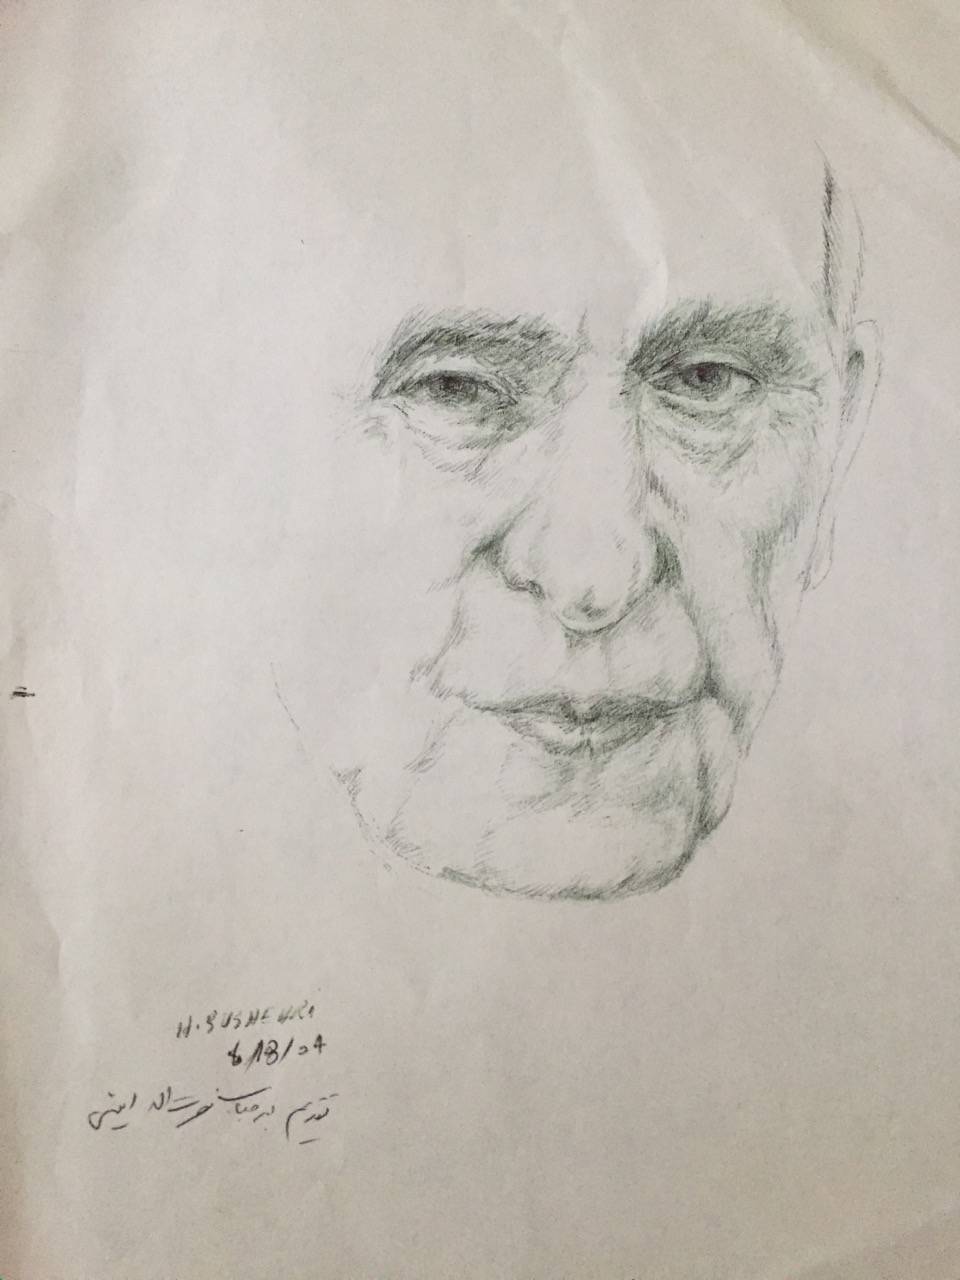 Drawing of Dr. Mossadegh by N.S. | Personal collection of Fariba Amini